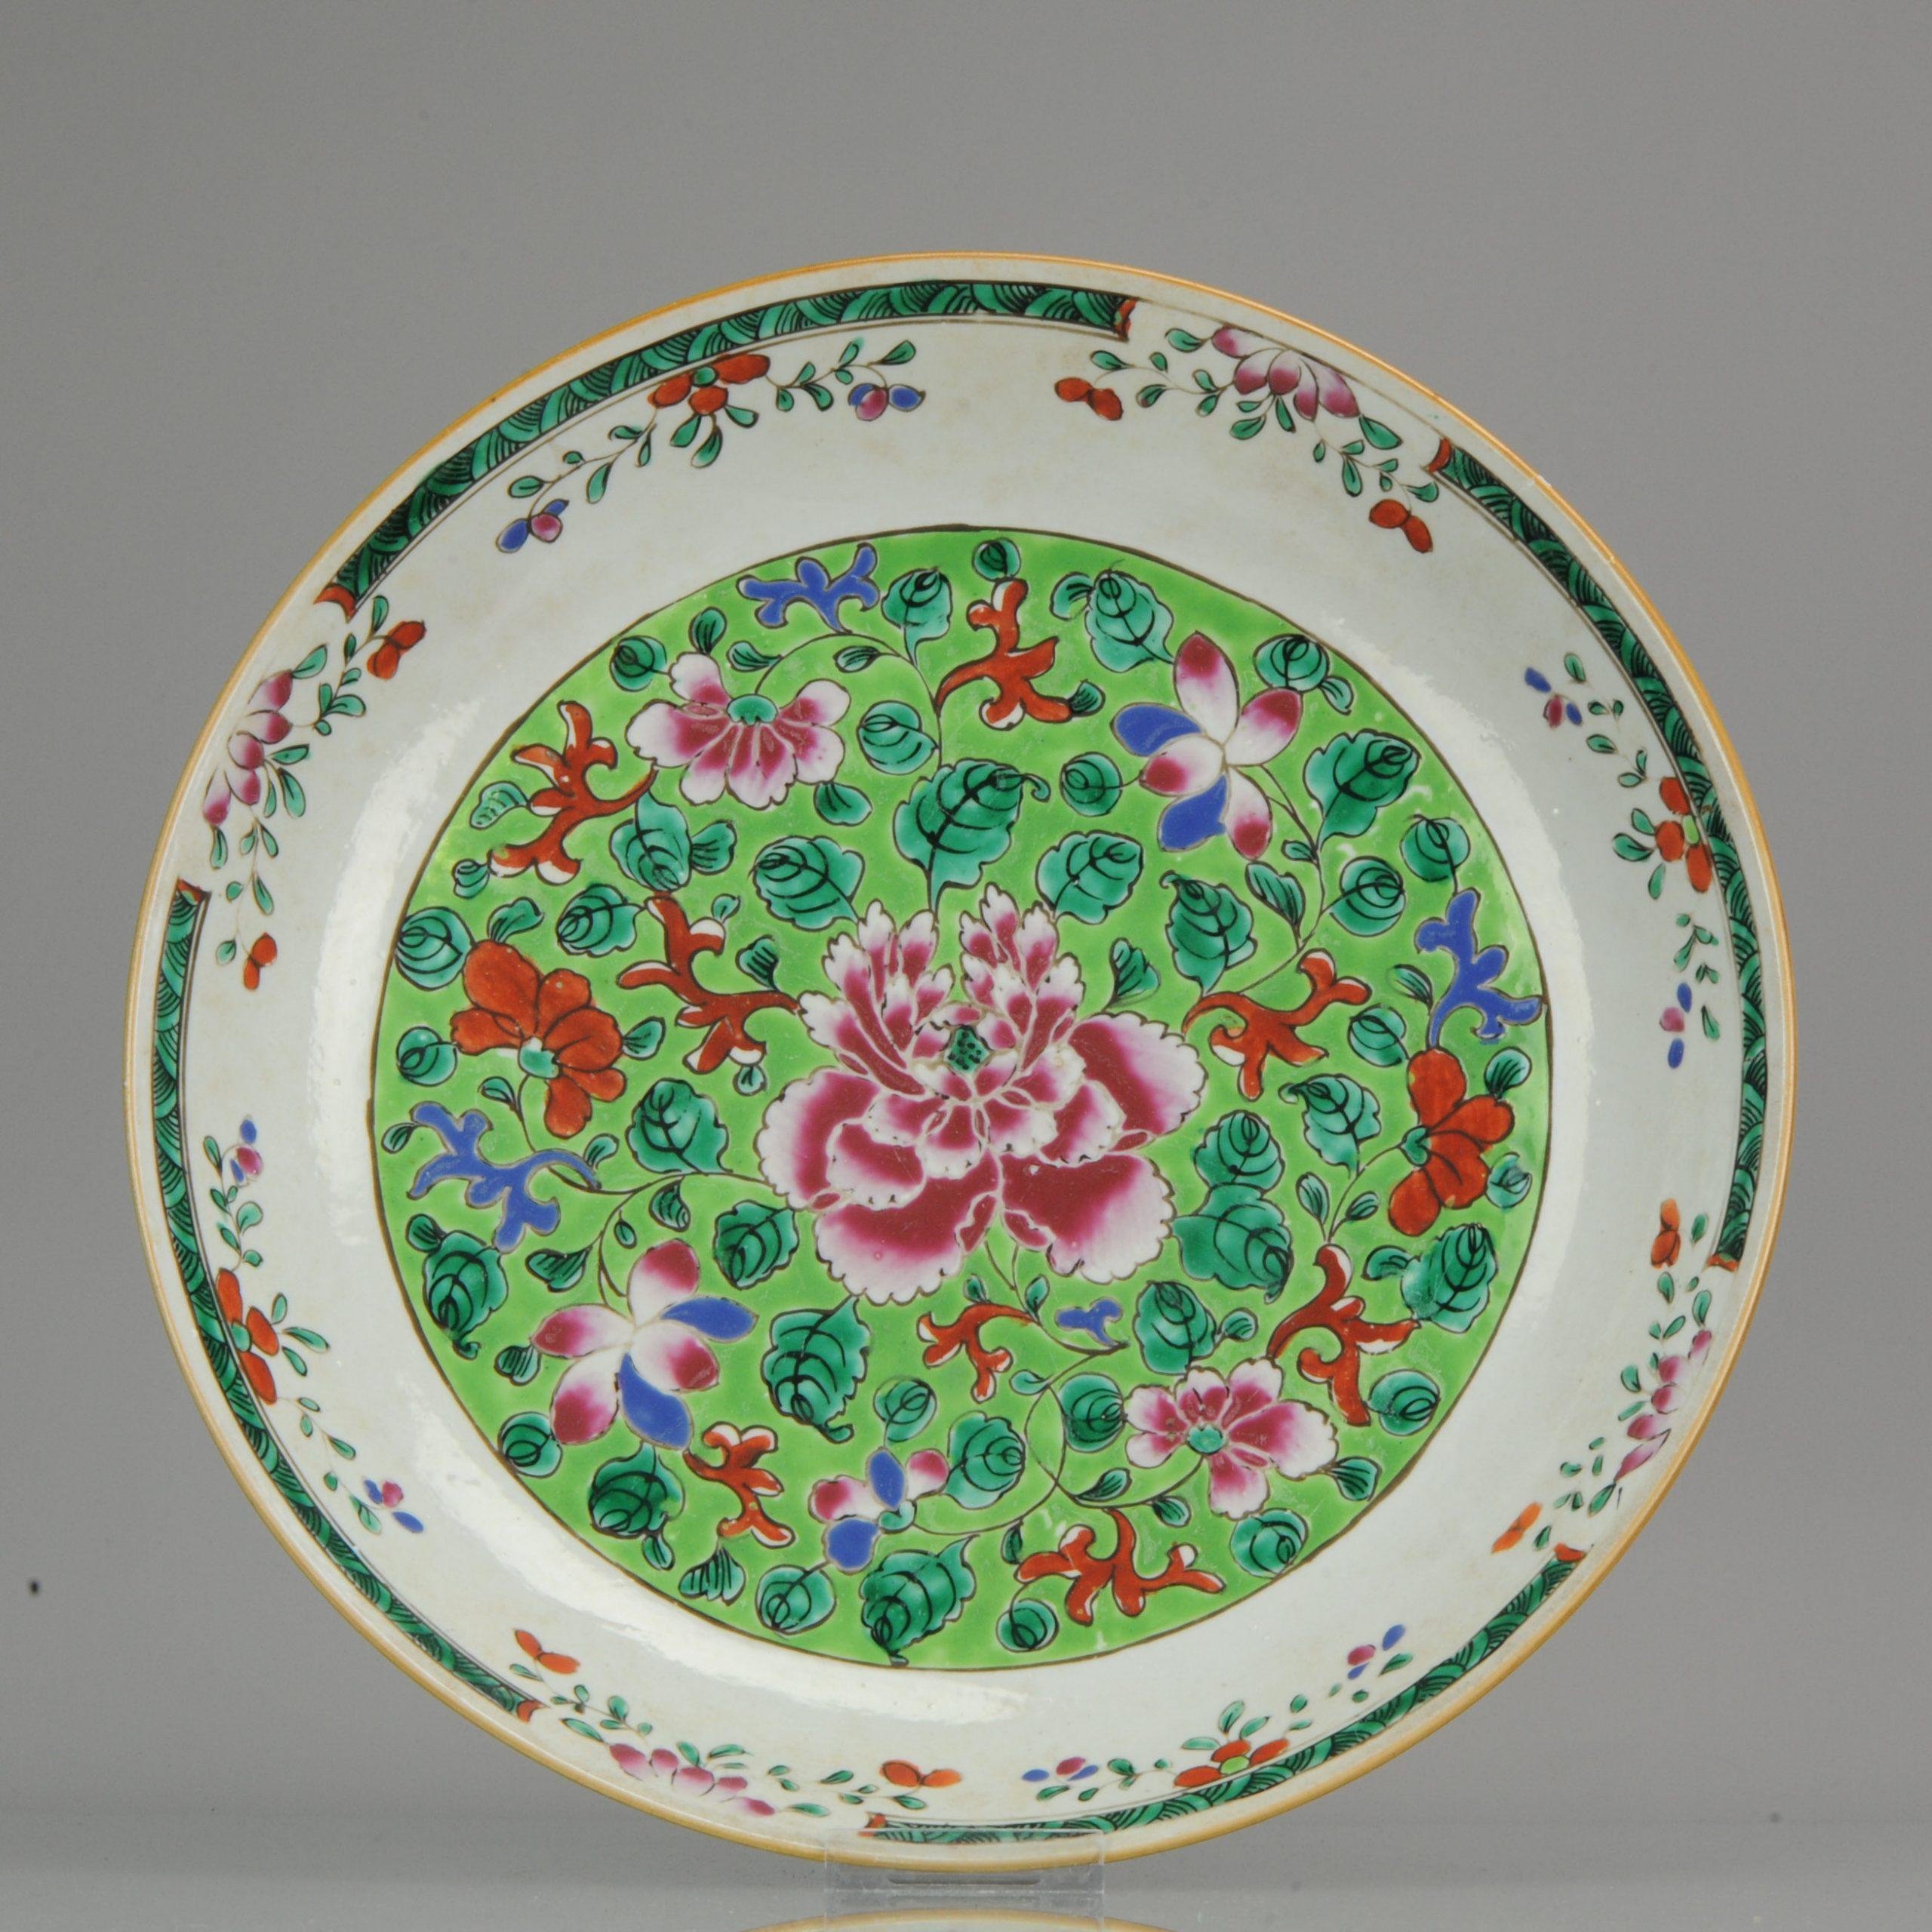 Lovely Chinese porcelain Famille Rose Charger with nice green enamels.

We think it could be a pre Bencharong / Pre Nyonya plate/charger. We call this style Pre Bencharong because it has many features of later bencharong / south East Asian wares,